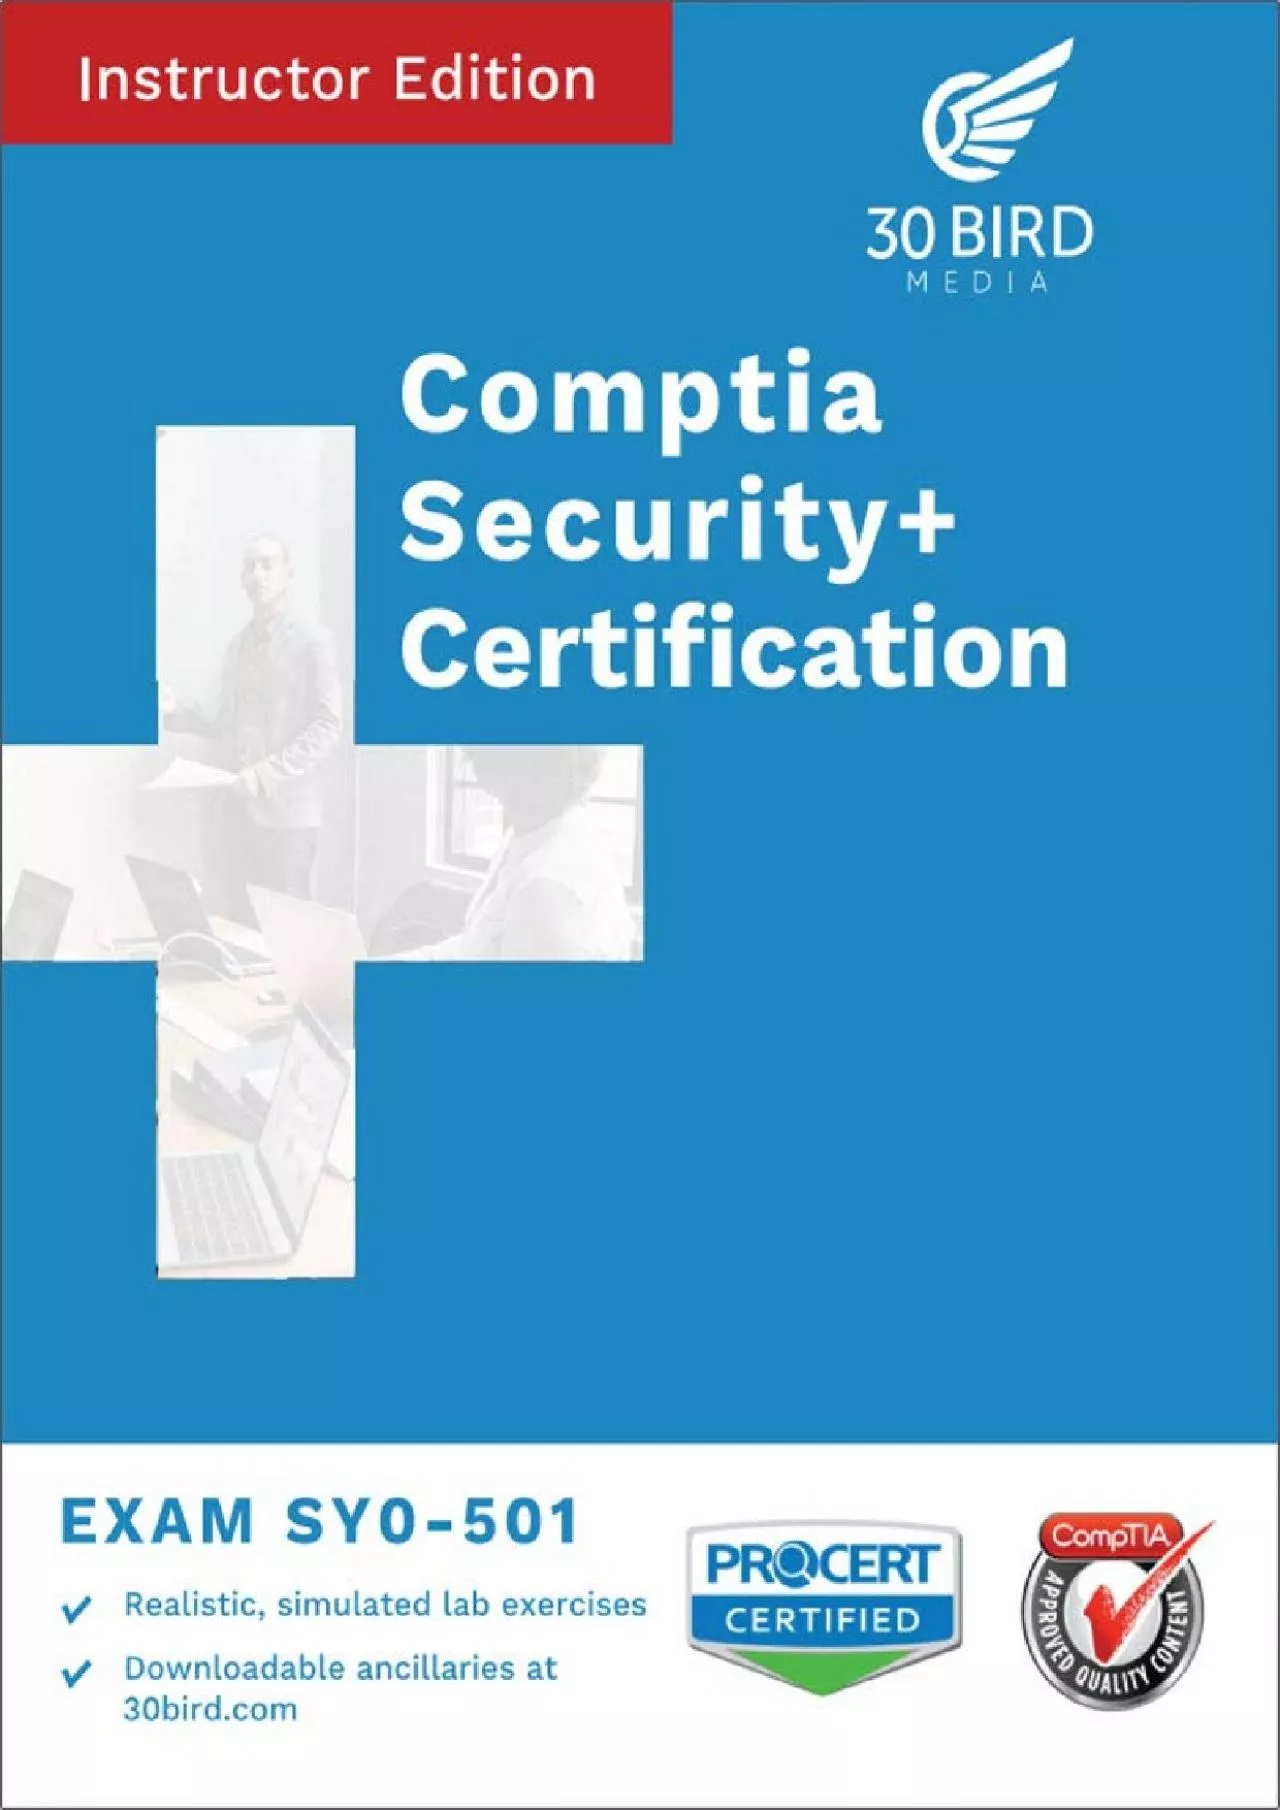 [DOWLOAD]-CompTIA Security+ Certification Exam SY0-501: Instructor Edition